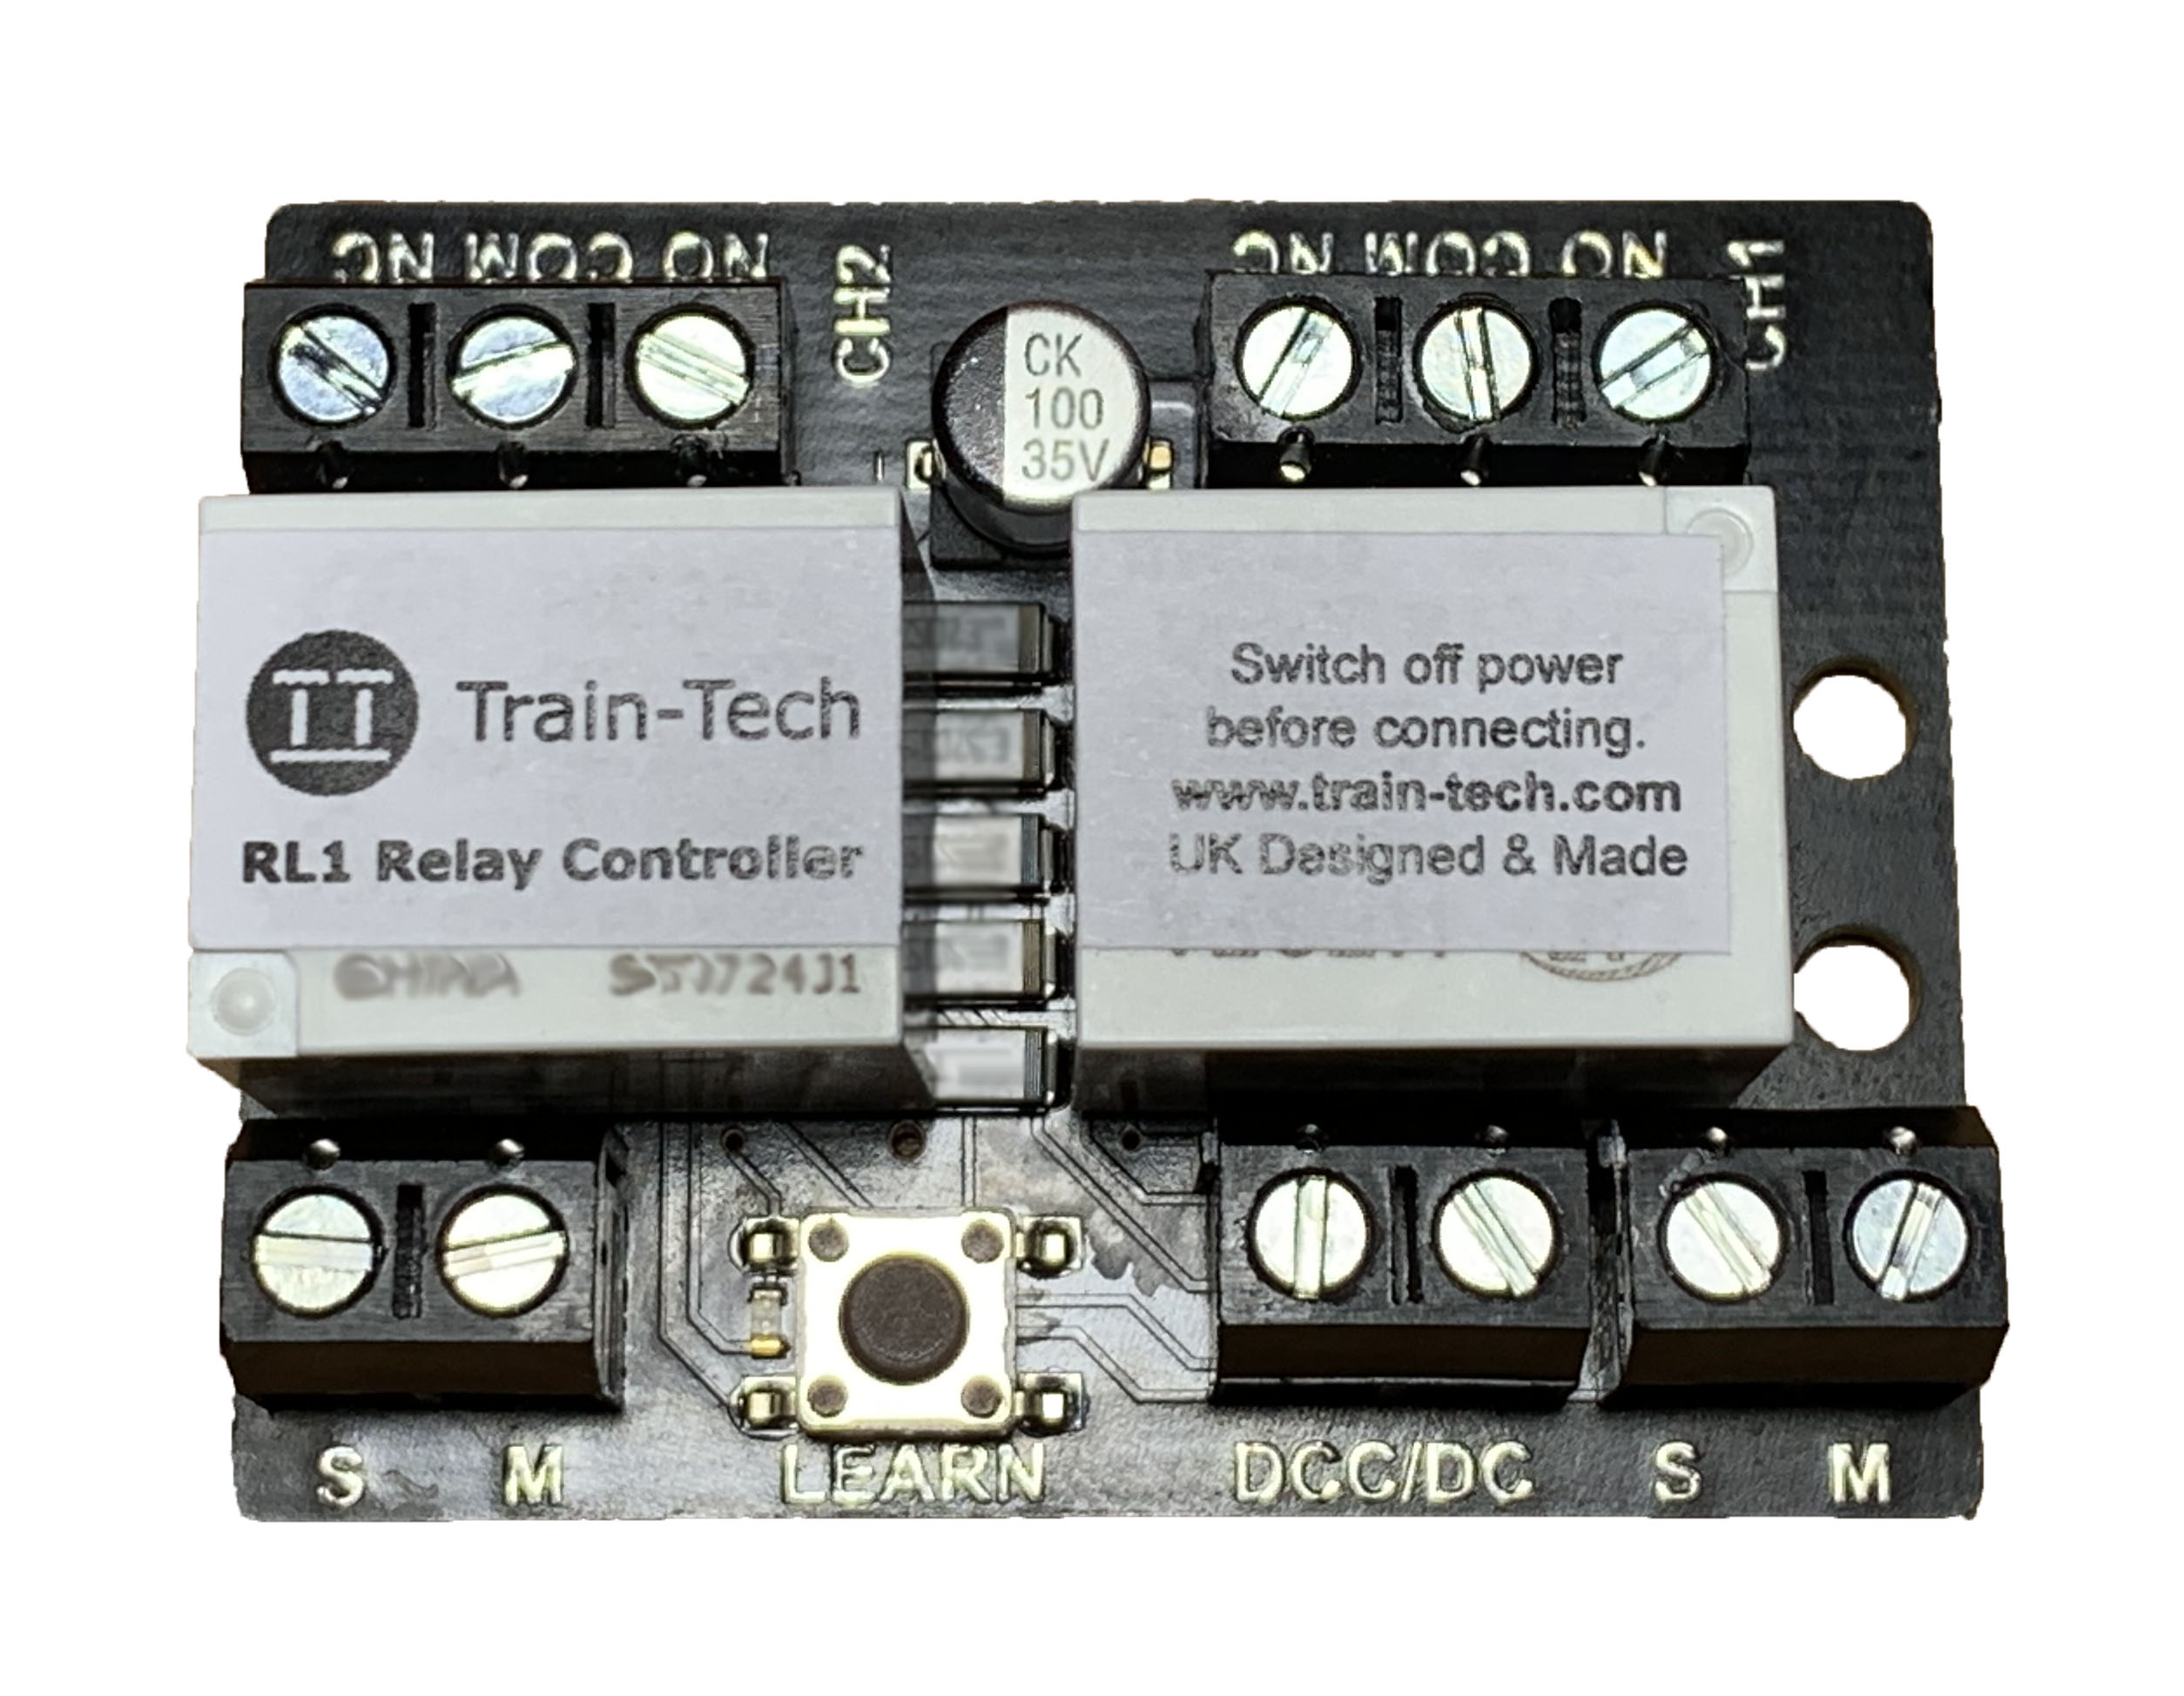 TRAIN-TECH RL1 Twin Channel Relay Controller For DC/DCC